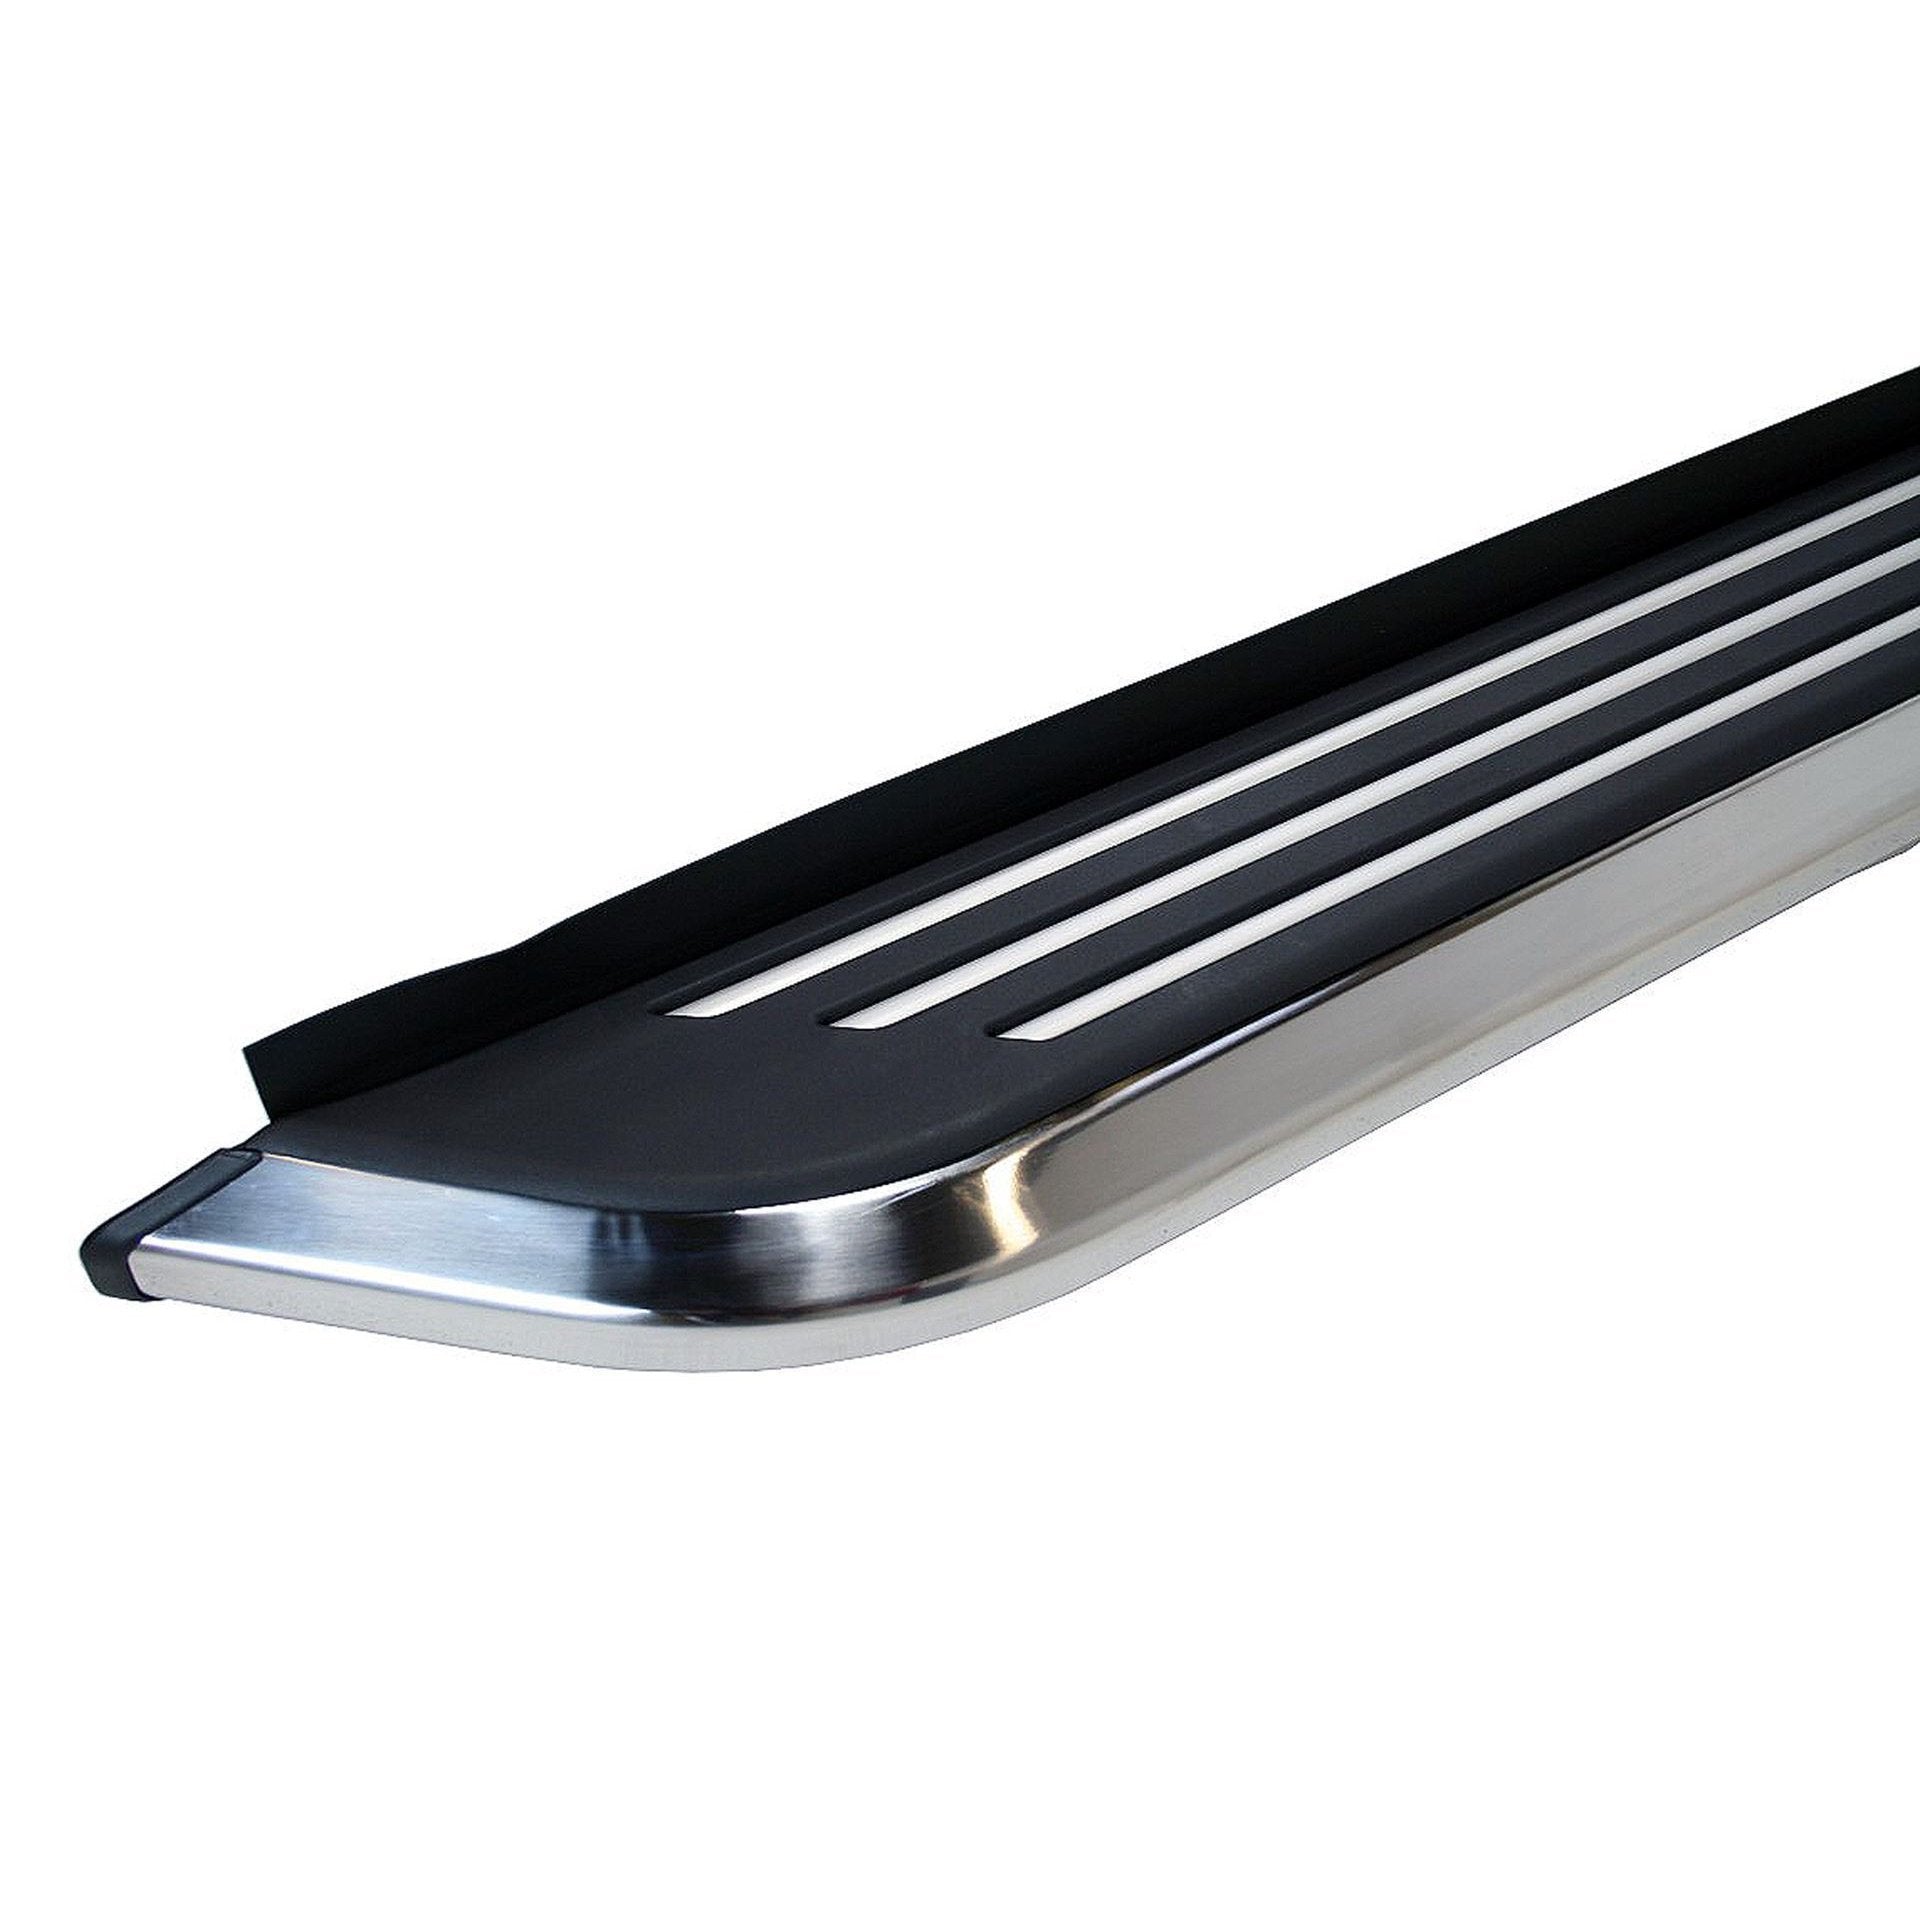 Premier Side Steps Running Boards for Isuzu D-Max Double Cab 2012-2020 -  - sold by Direct4x4